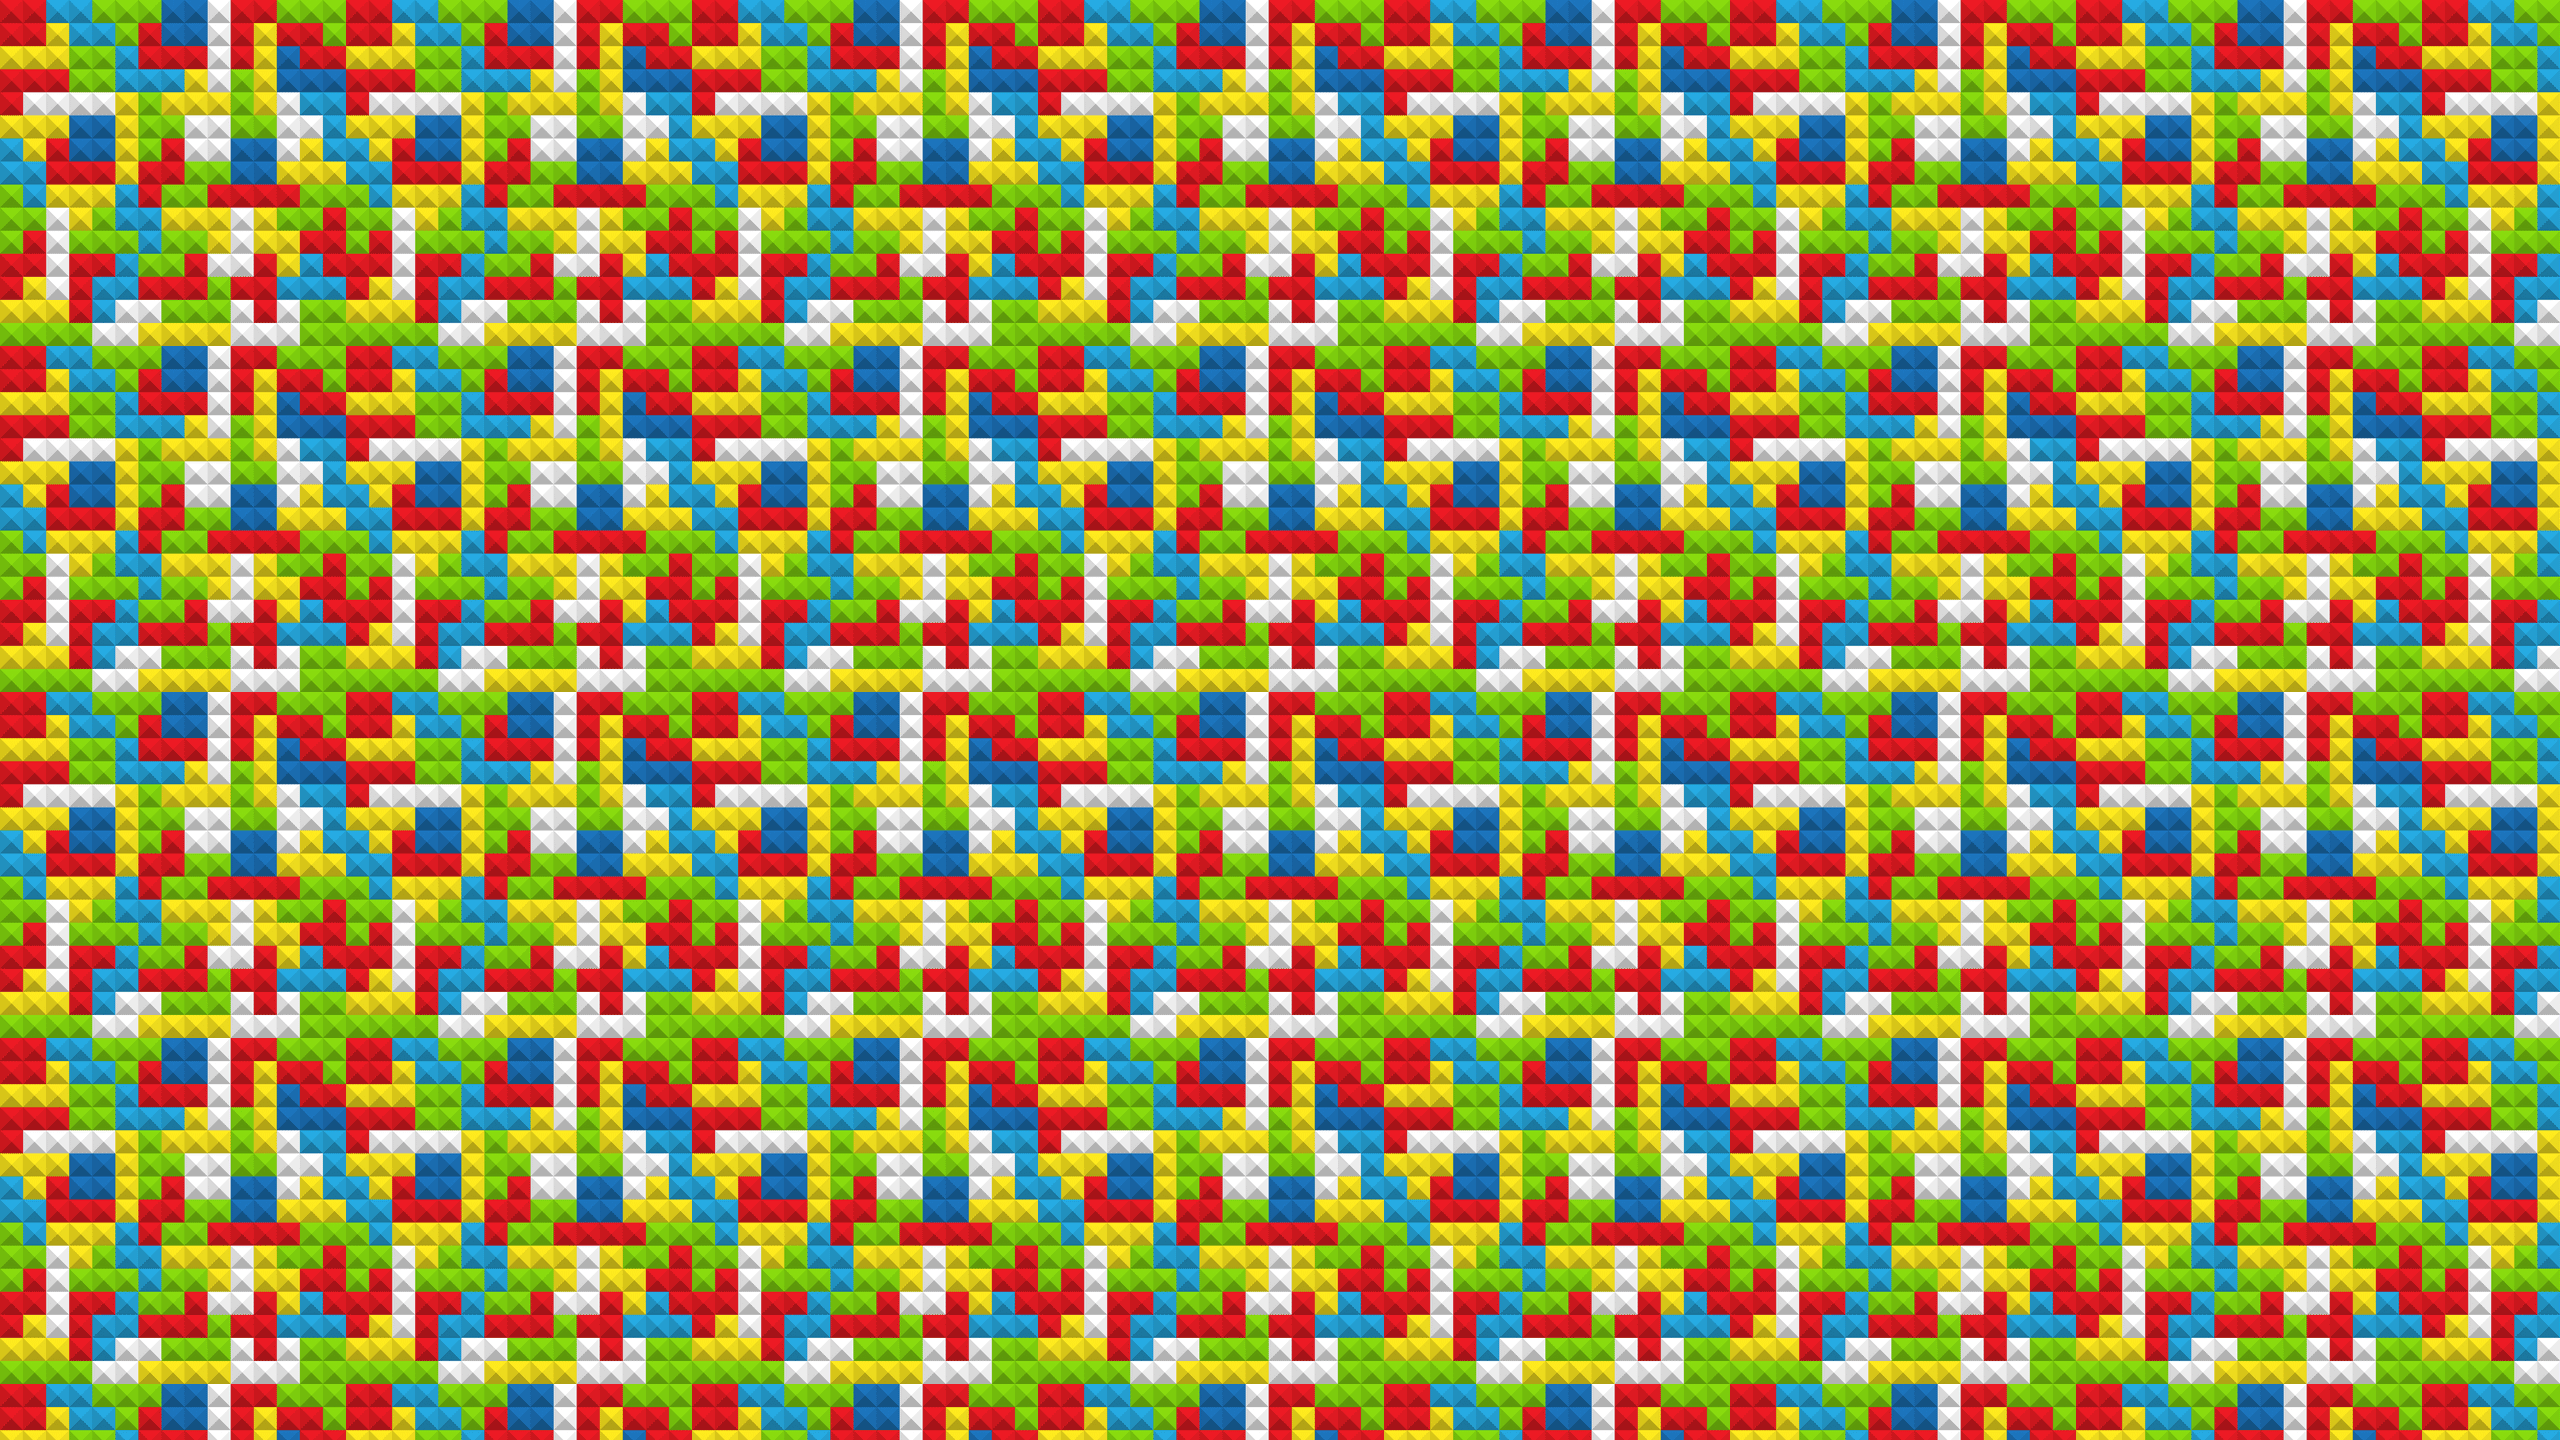 this Lego Tetris Desktop Wallpaper is easy Just save the wallpaper 2560x1440